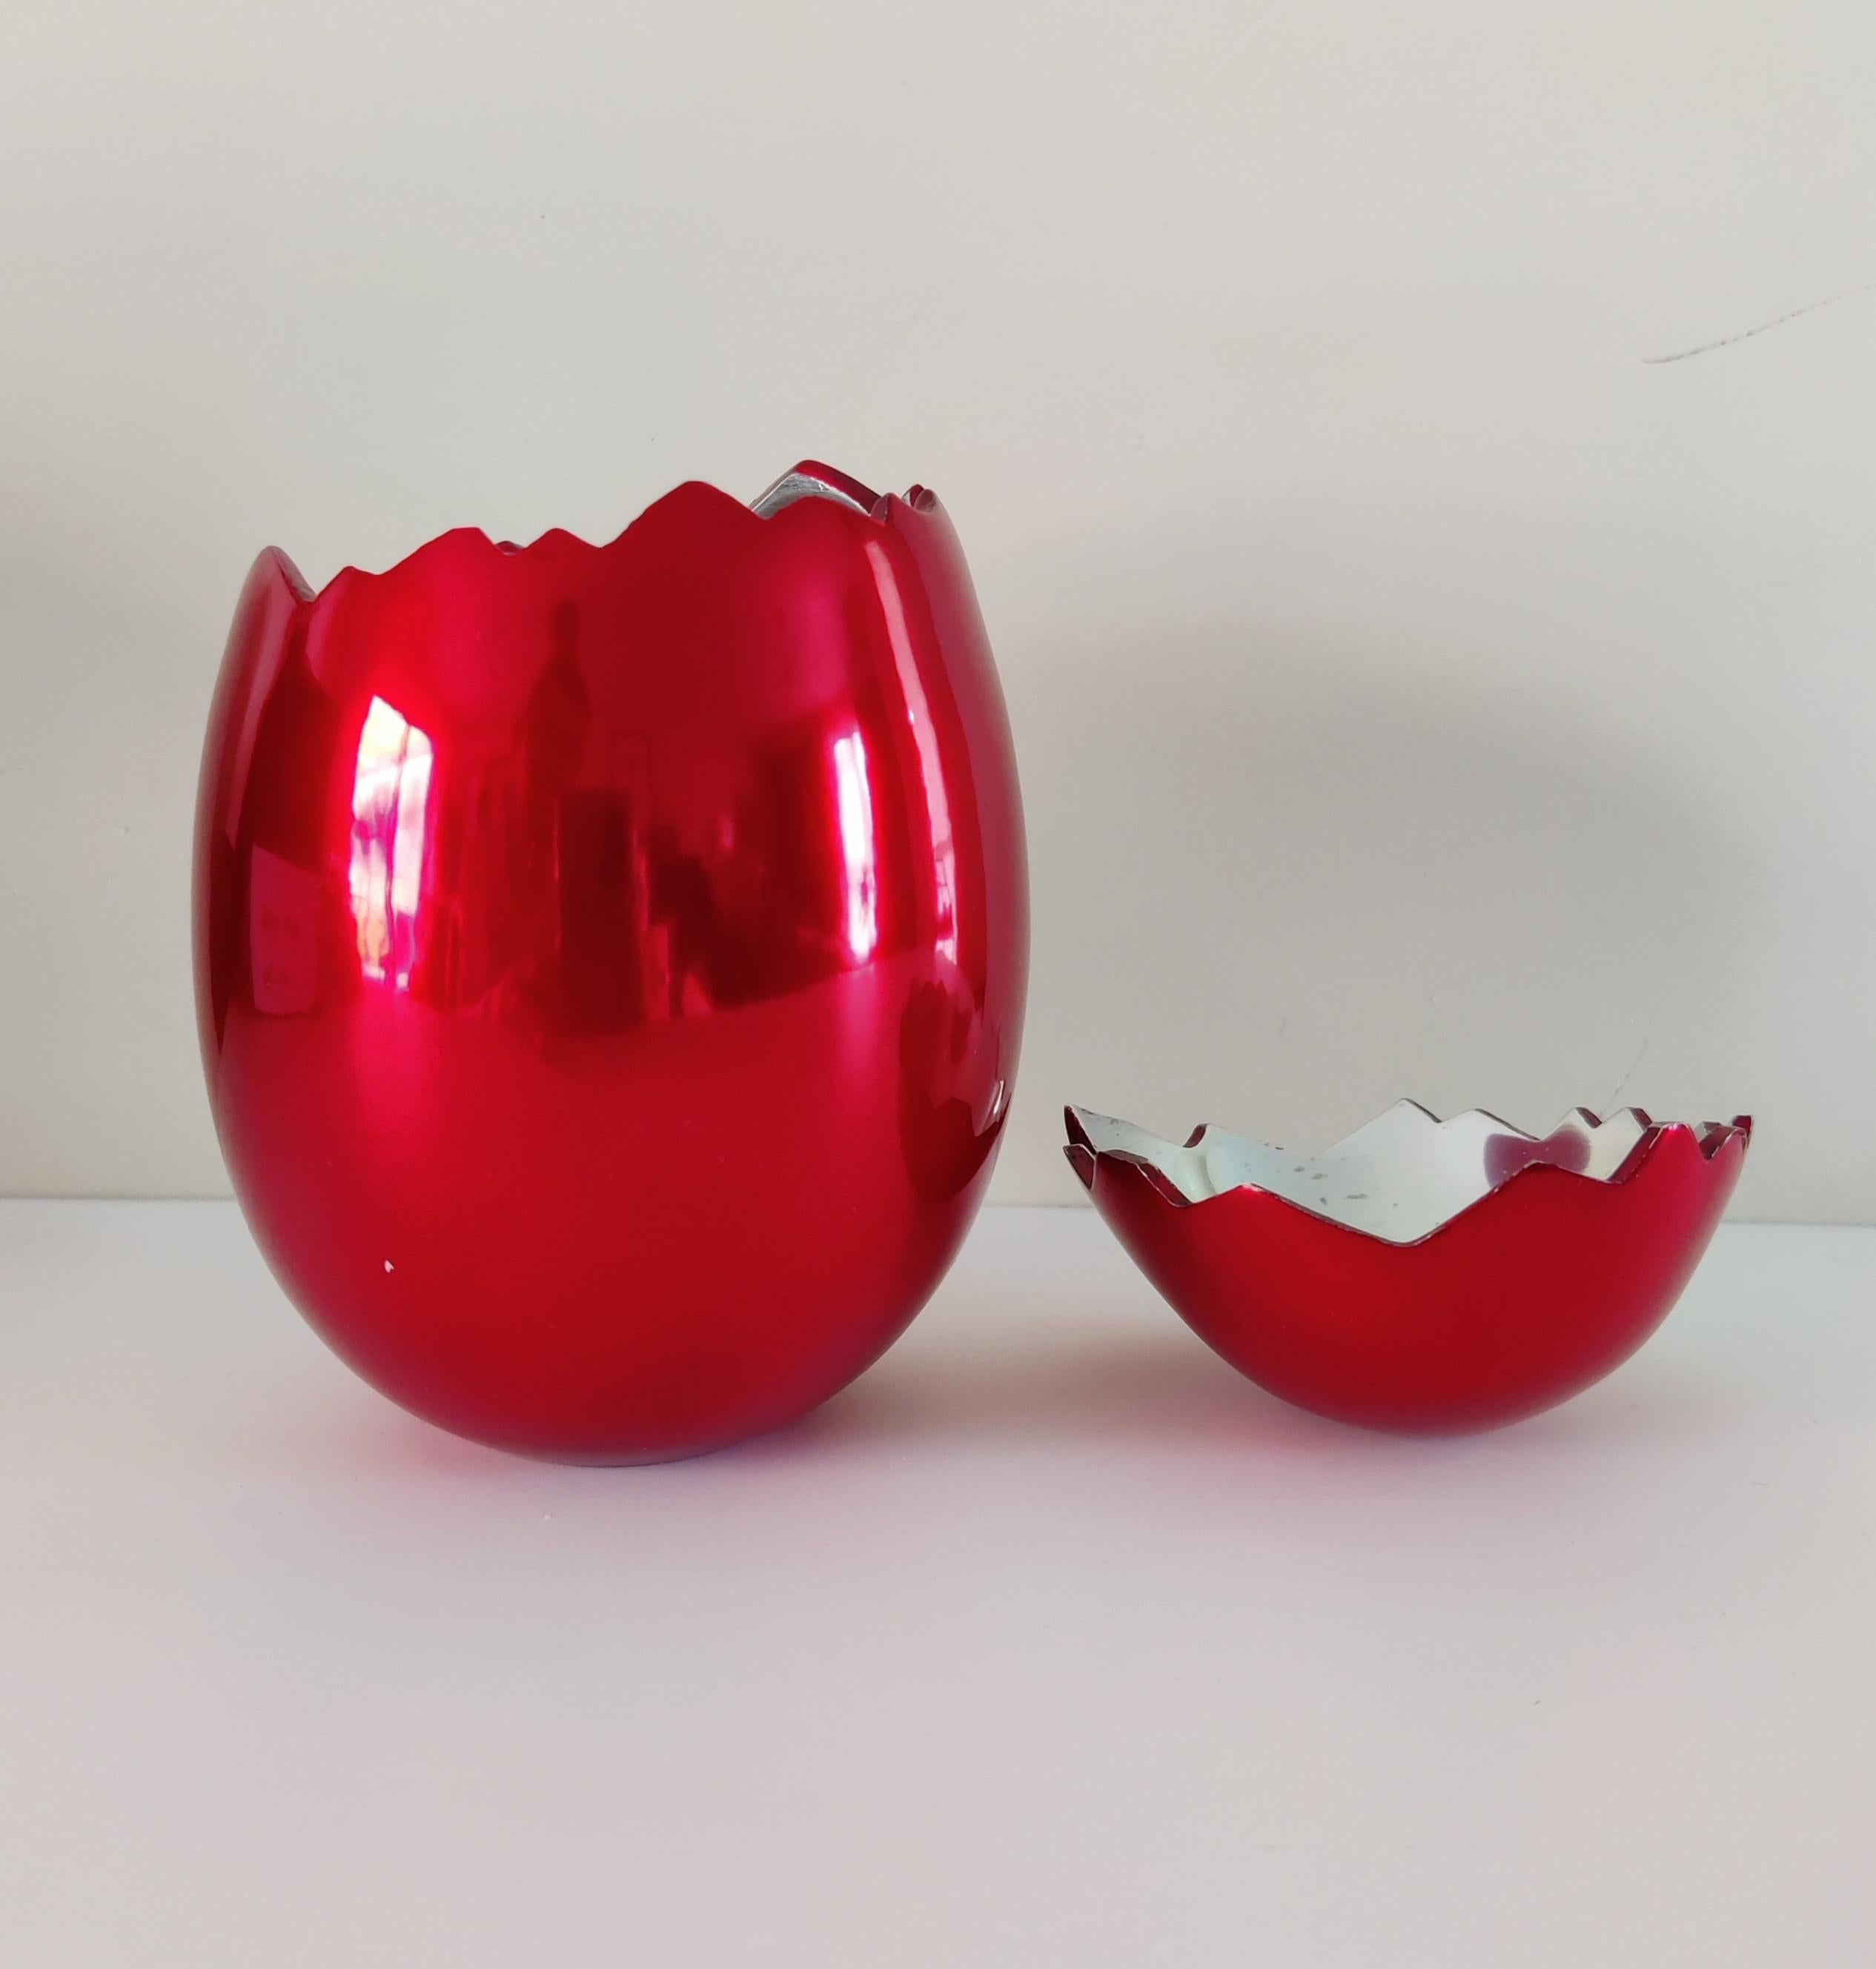 Jeff Koons -- Cracked Egg (Red)

Aluminium multiple with red glaze, 2008
From the edition of 1,000 
Published by the Los Angeles County Museum of Art, Los Angeles, as an invitation for the opening of the Broad Contemporary Art Museum, lacking the